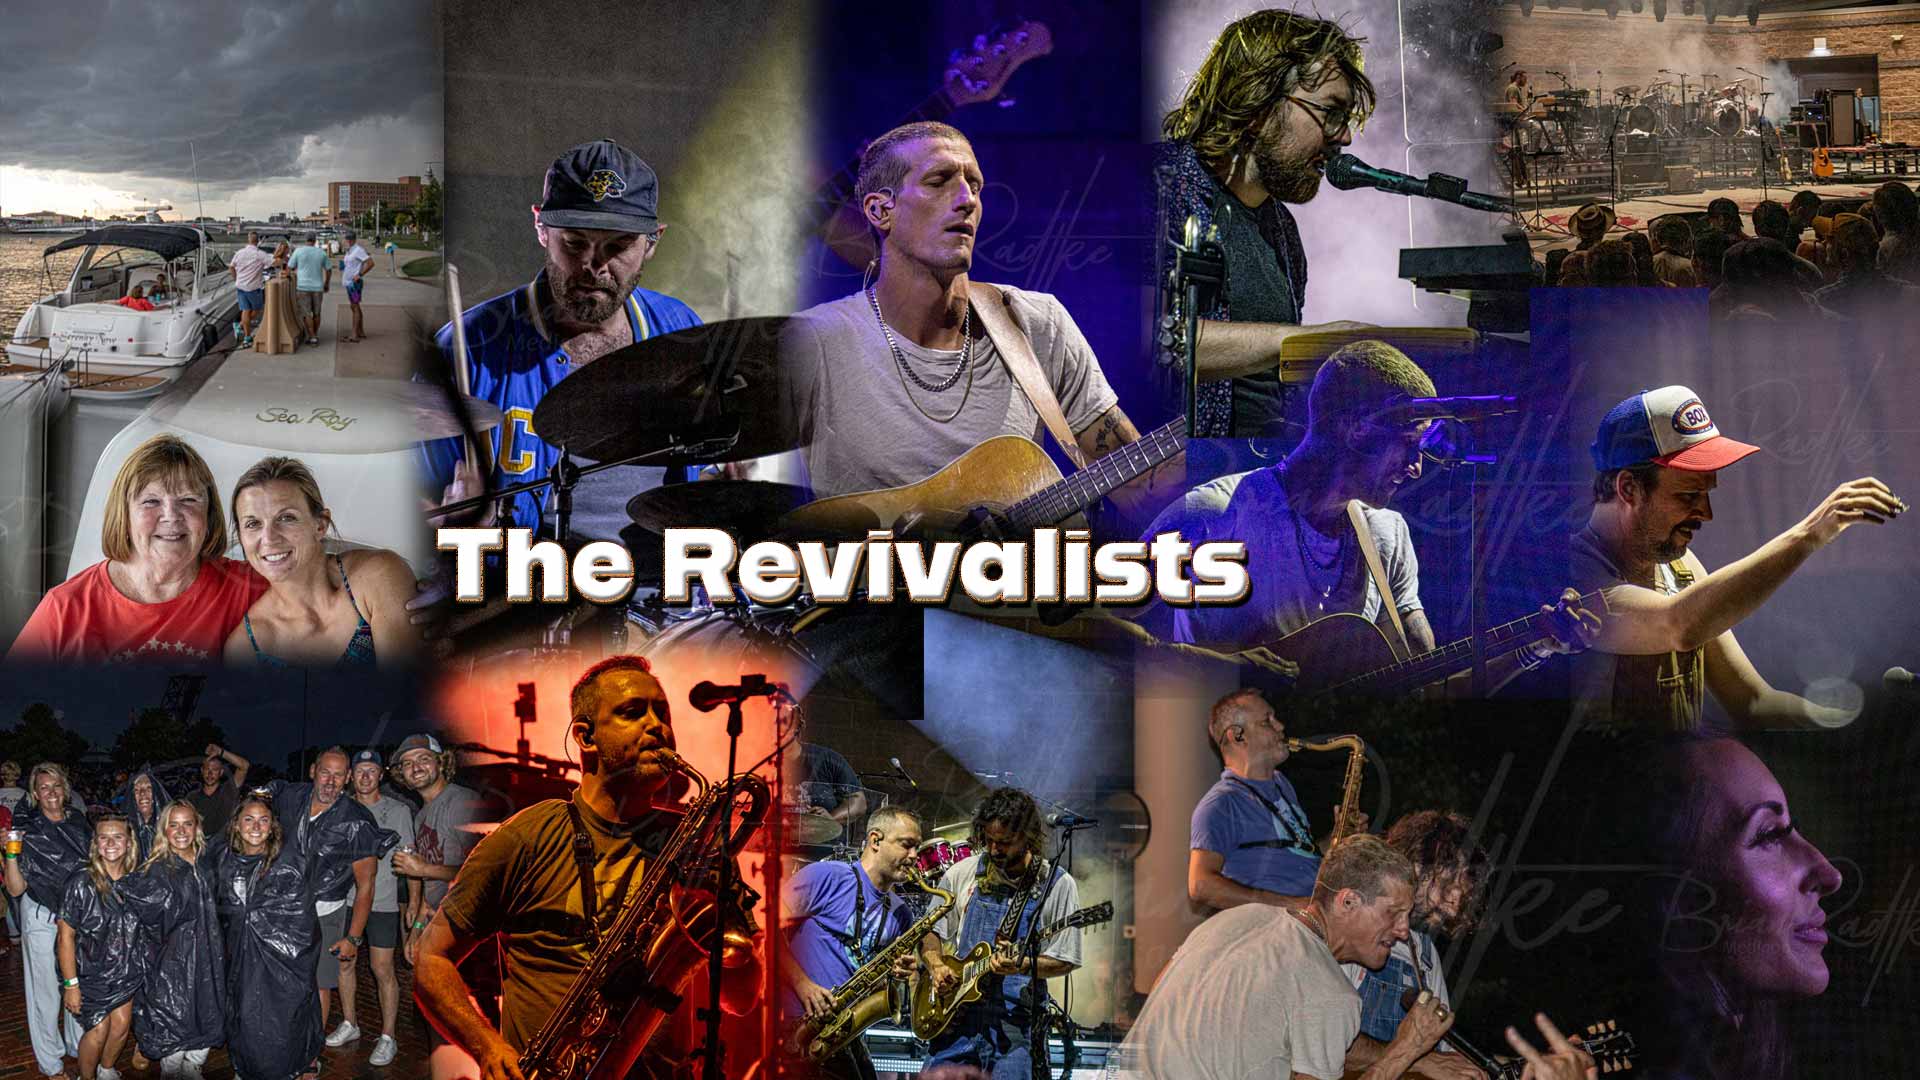 The Revivalists band at Waterfest in Oshkosh